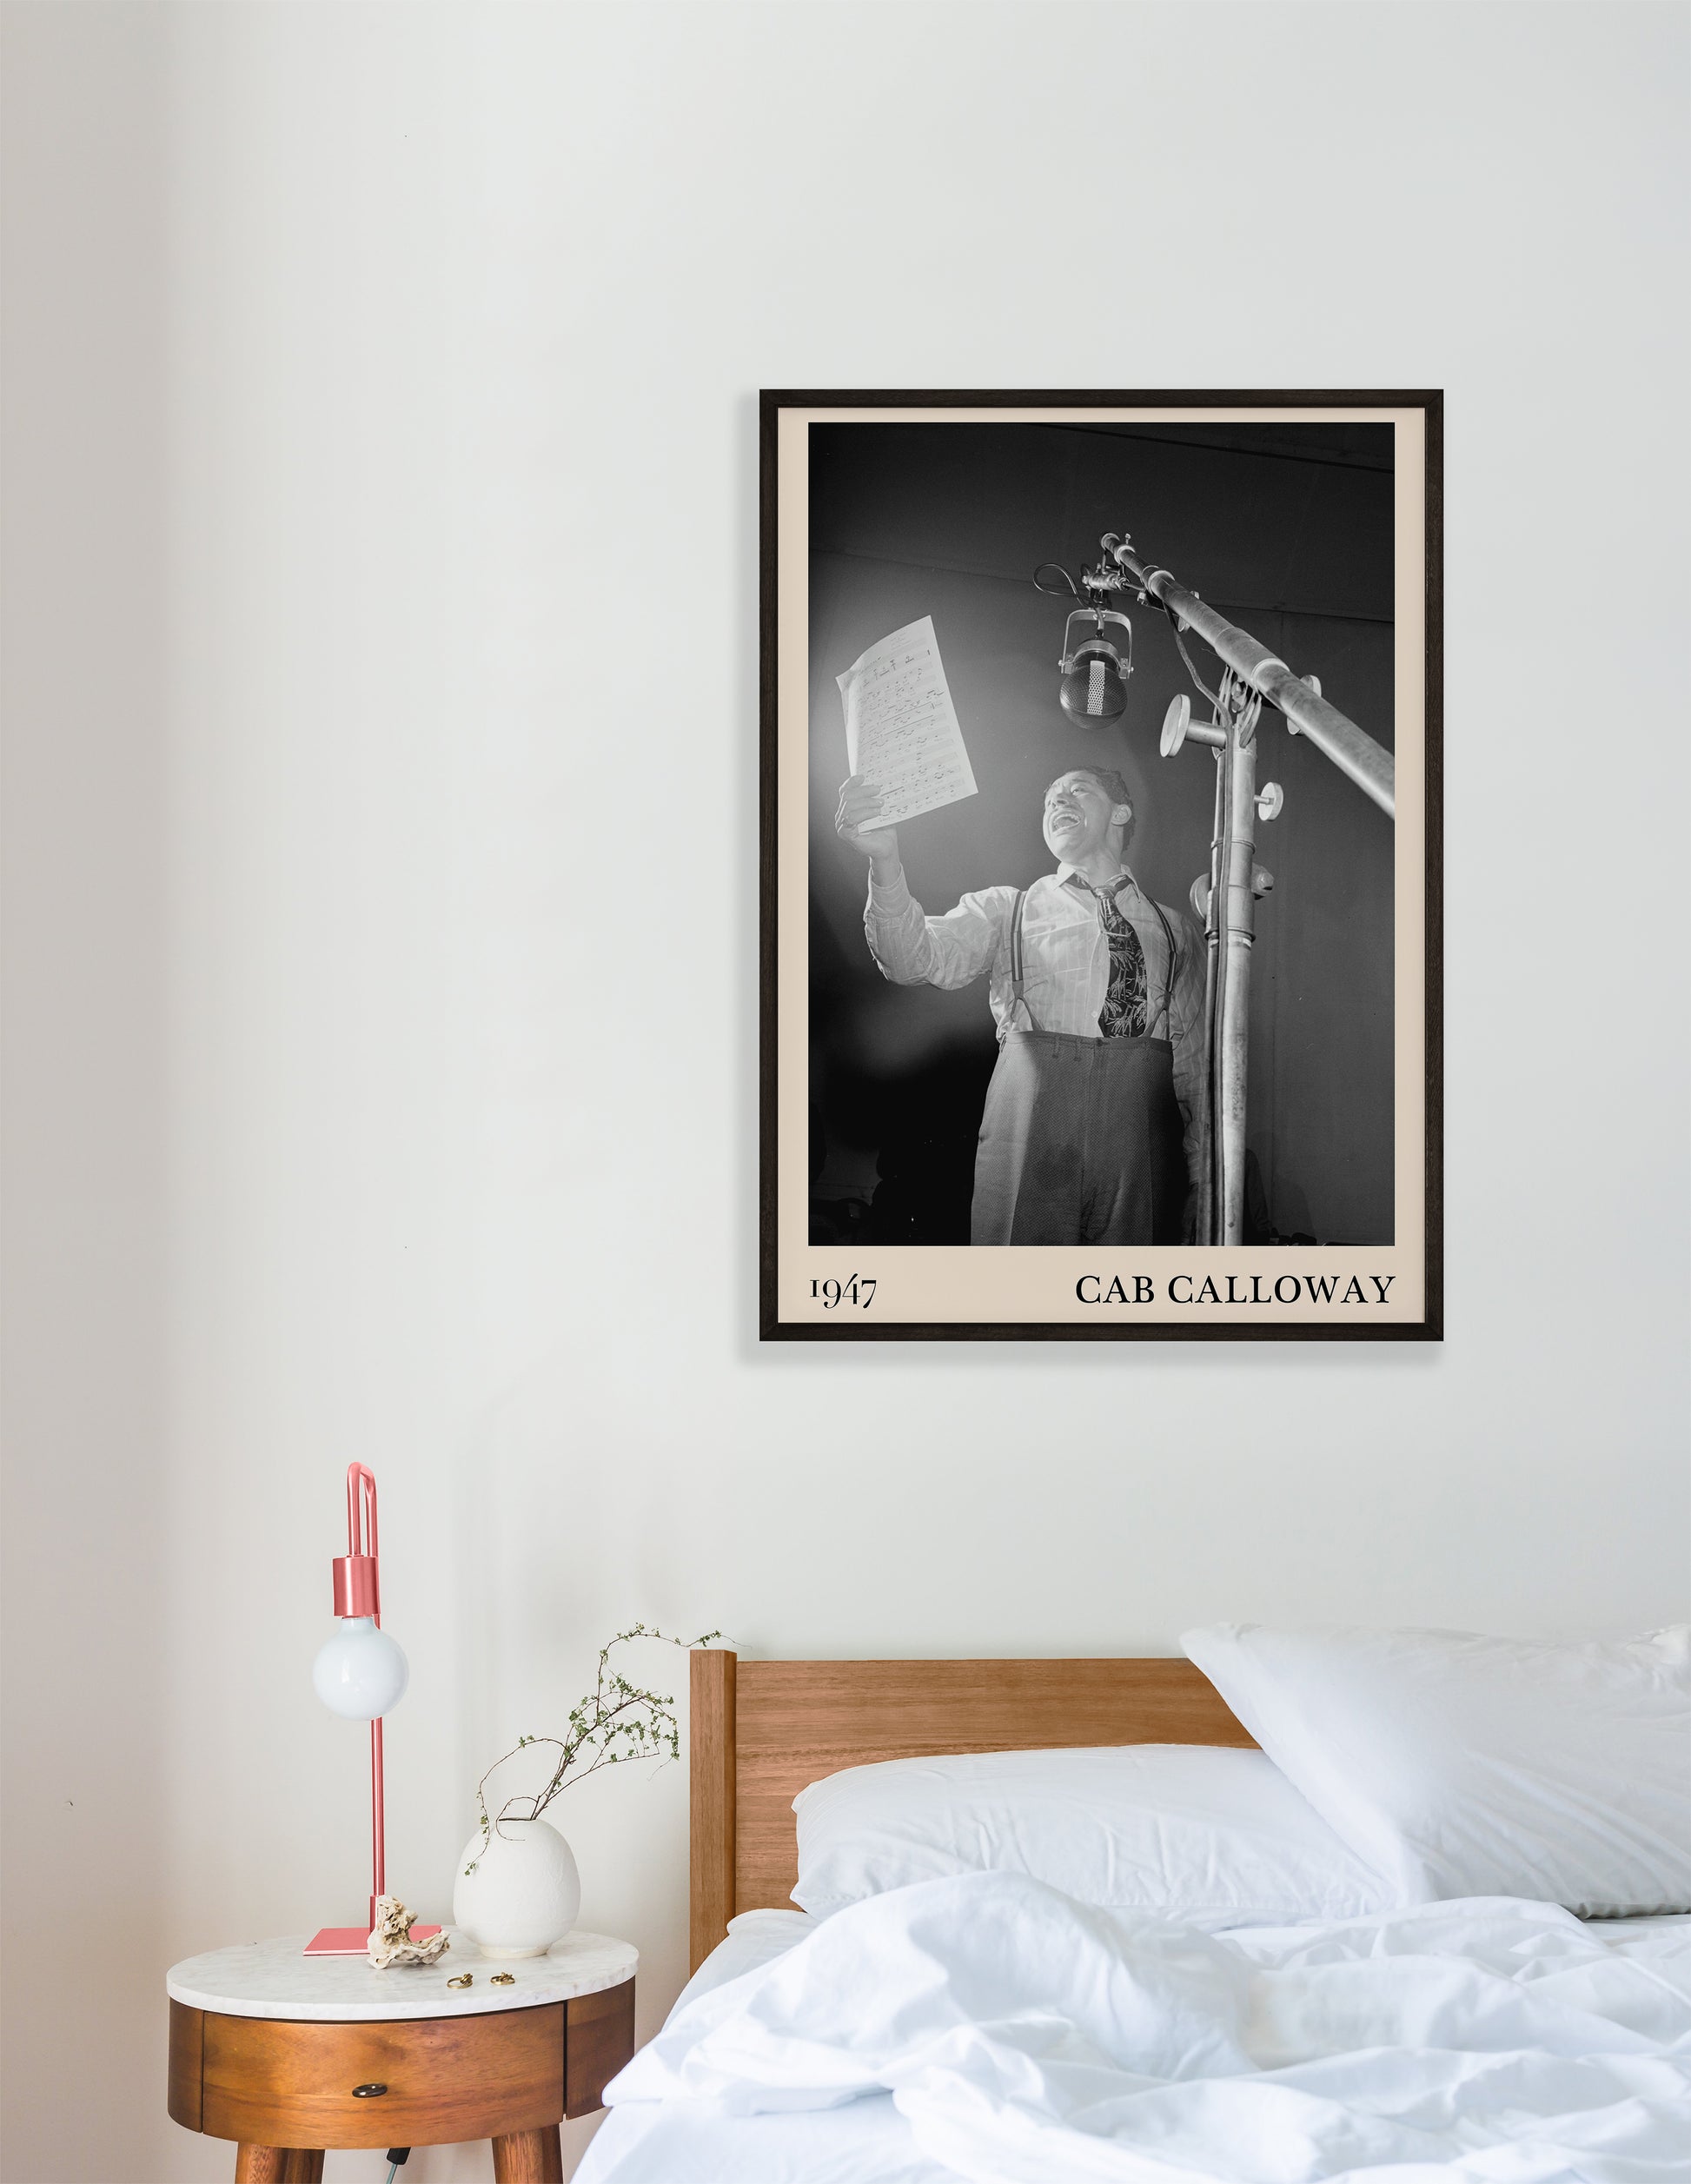 Cool 1947 photo of Cab Calloway crafted into  black framed print, hanging on a bedroom wall